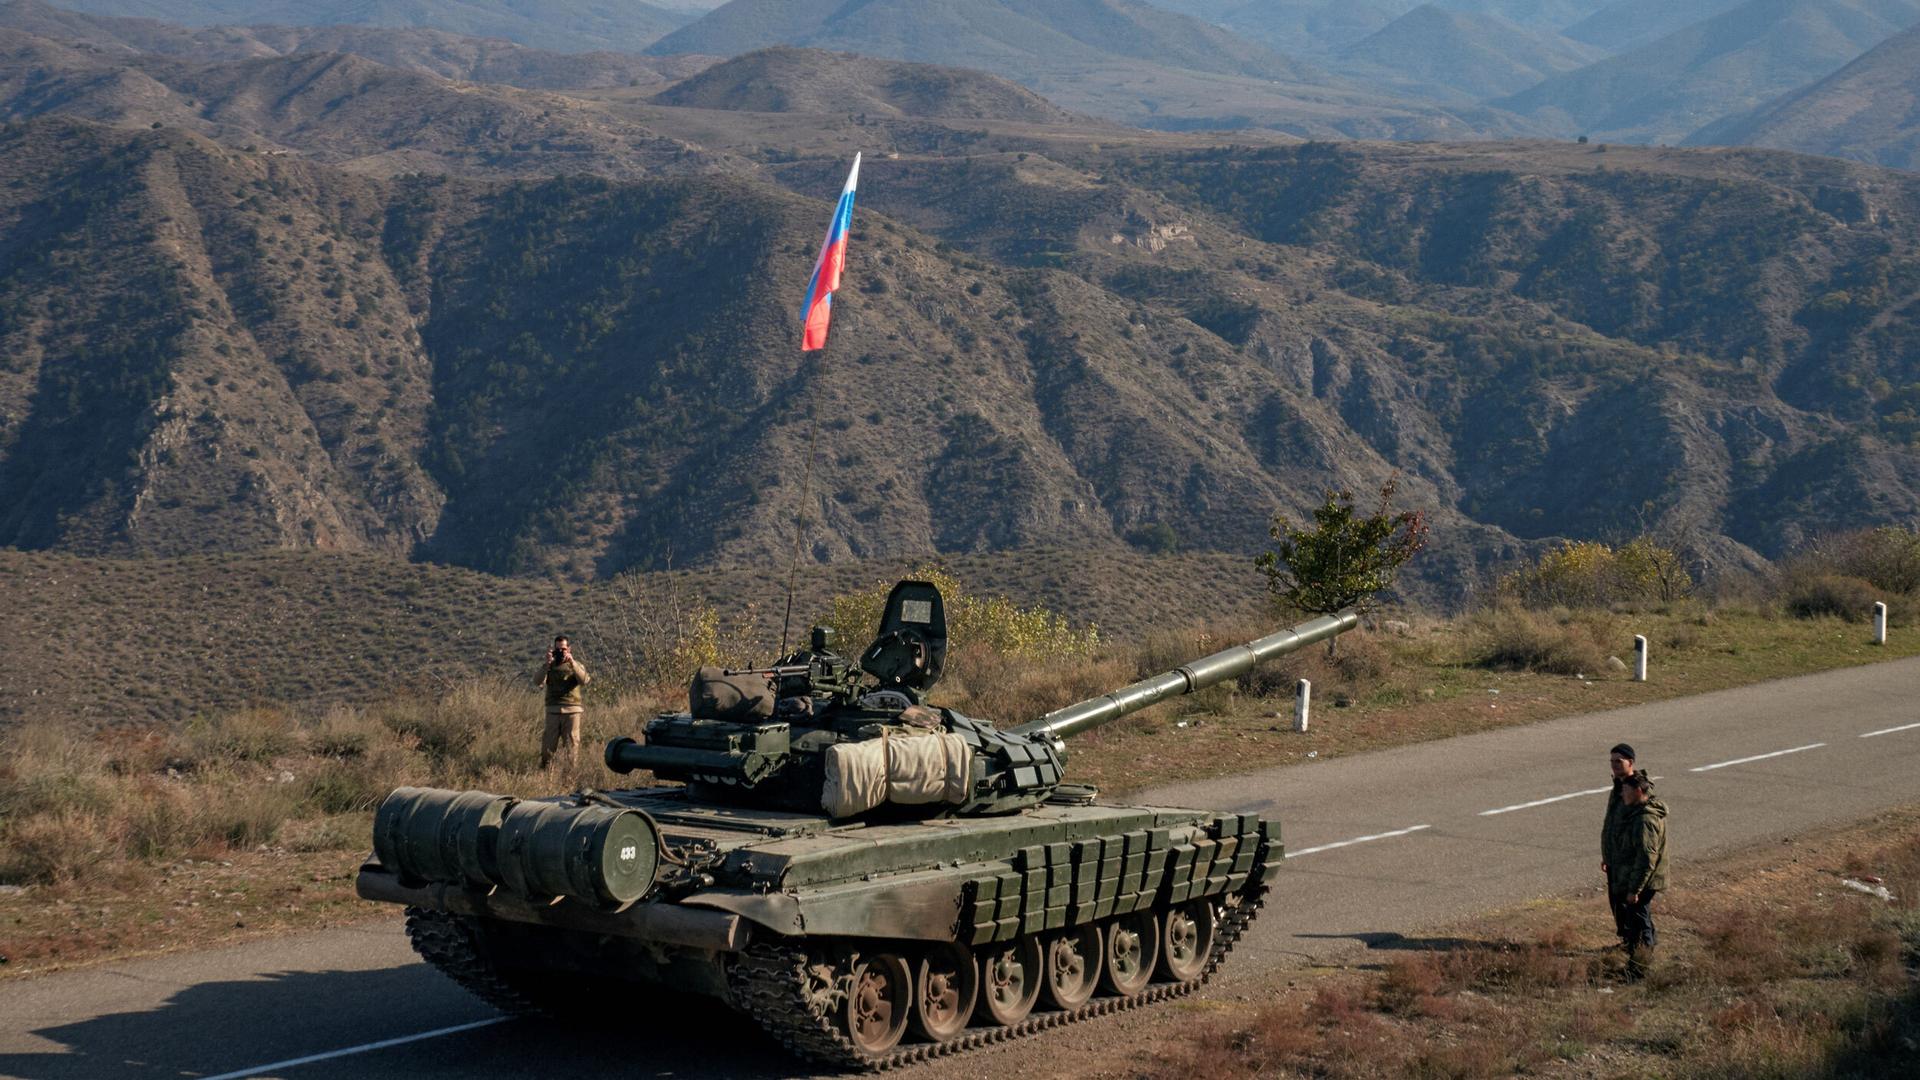 Service members of Russian peacekeeping troops stand next to a tank near the border with Armenia, following the signing of a deal to end the military conflict between Azerbaijan and ethnic Armenian forces, in the region of Nagorno-Karabakh, Nov. 10, 2020.